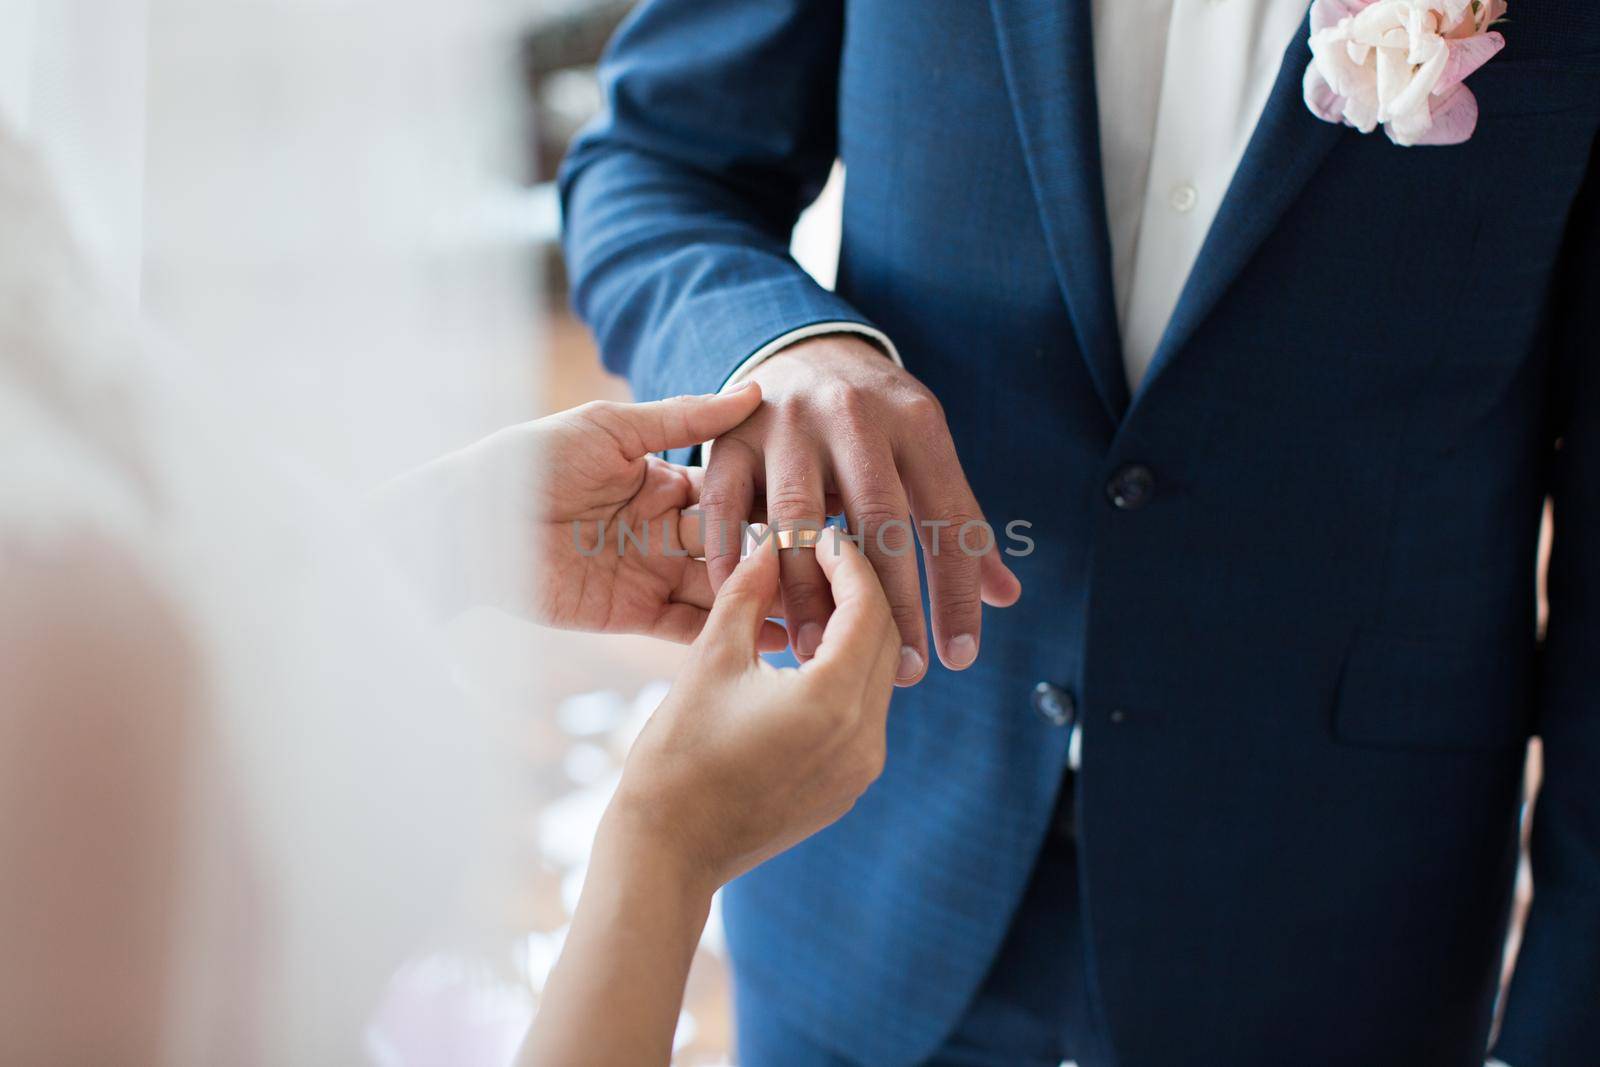 The bride puts a ring on the bride's finger during the wedding ceremony